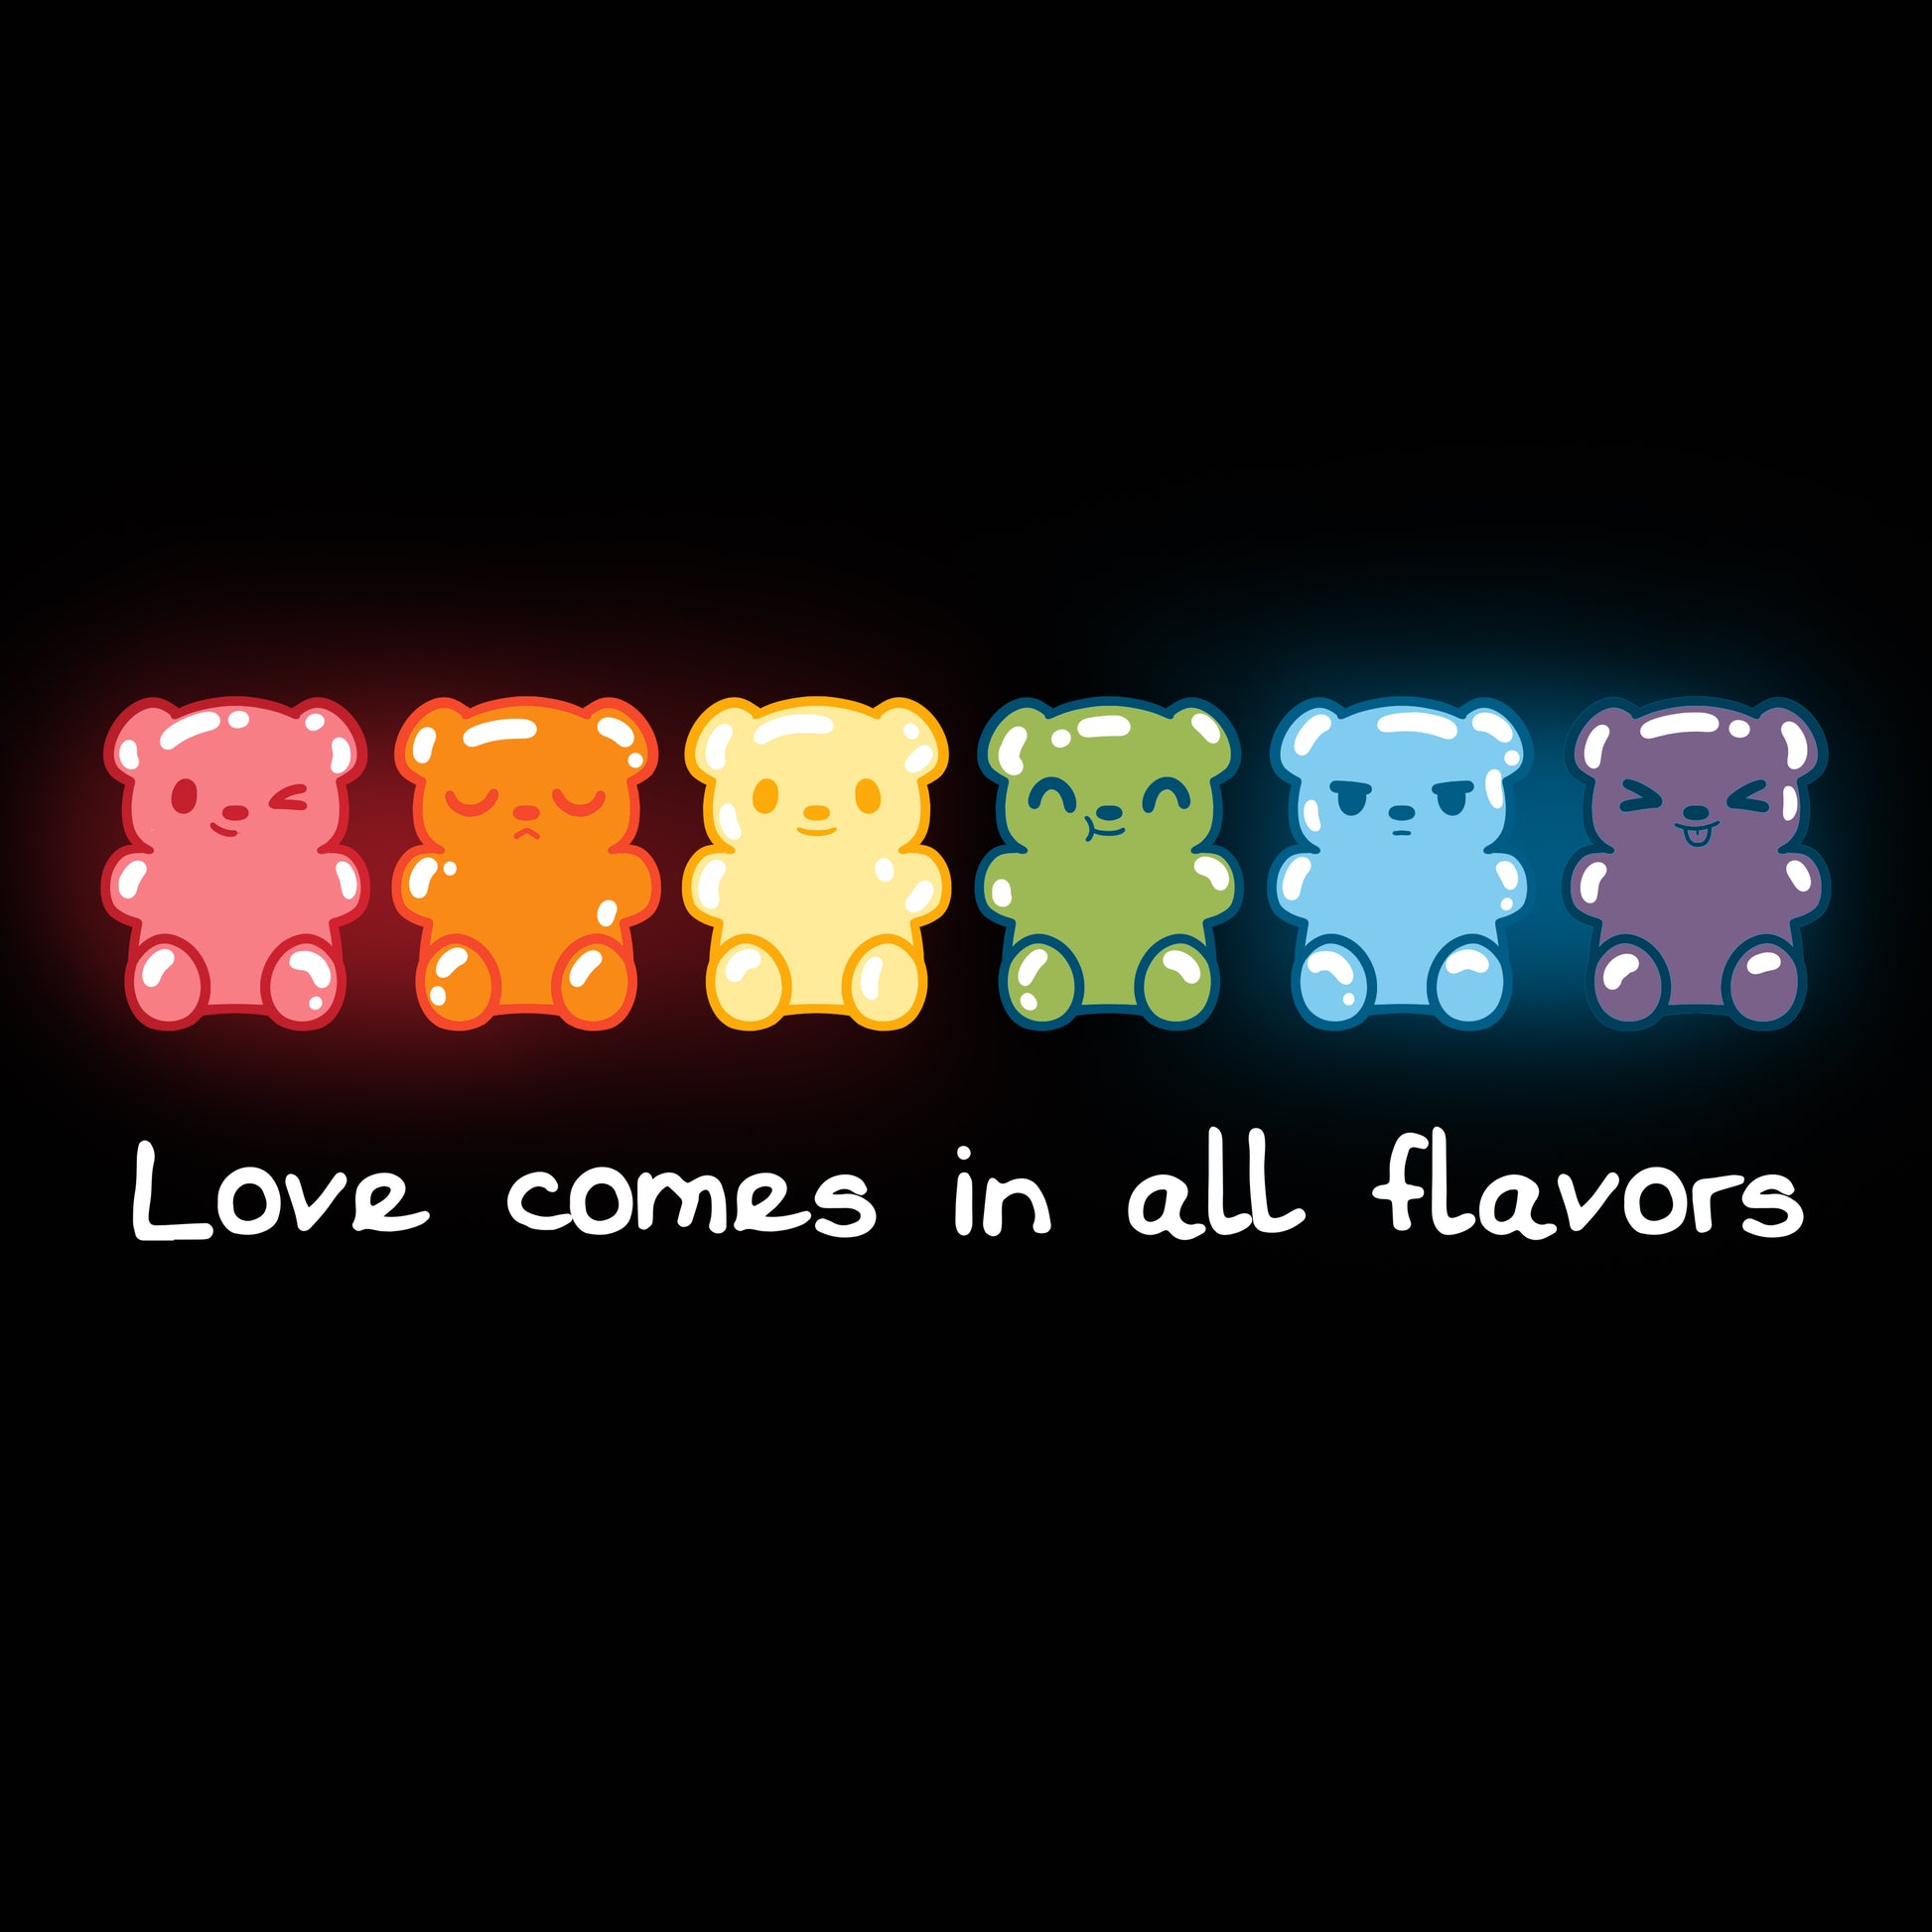 TeeTurtle loves Love Comes In All Flavors.